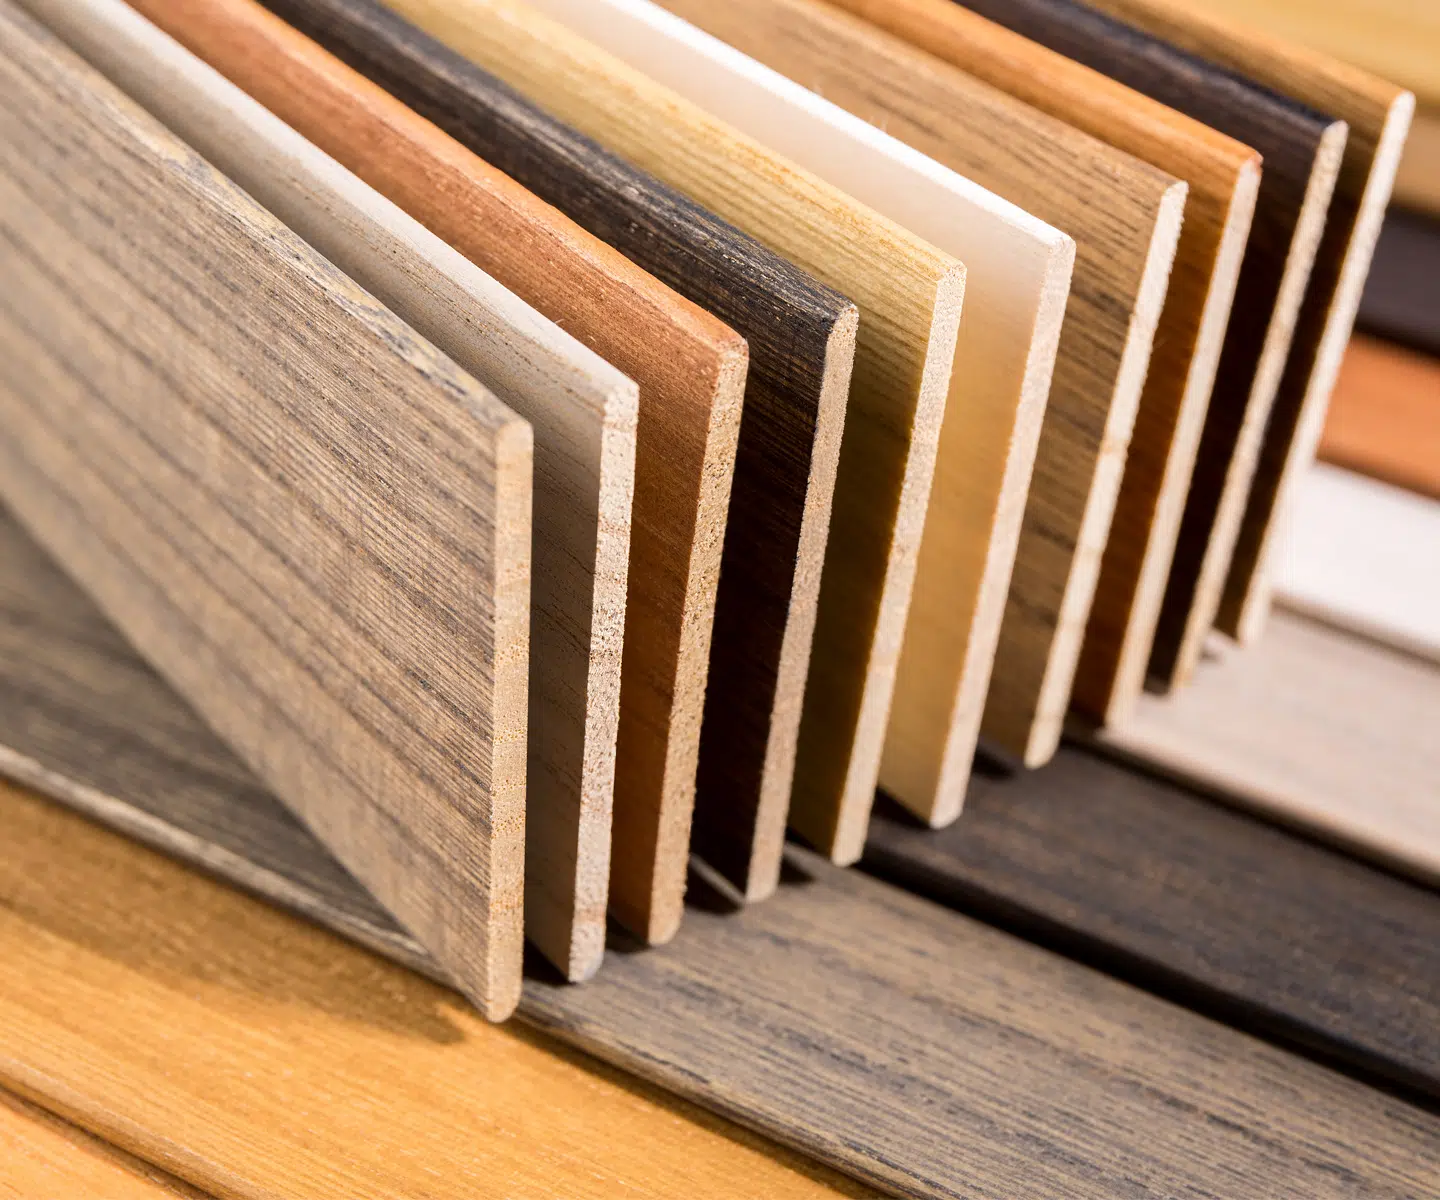 Upclose palette of on-trend colors and character-rich slats for wood blinds